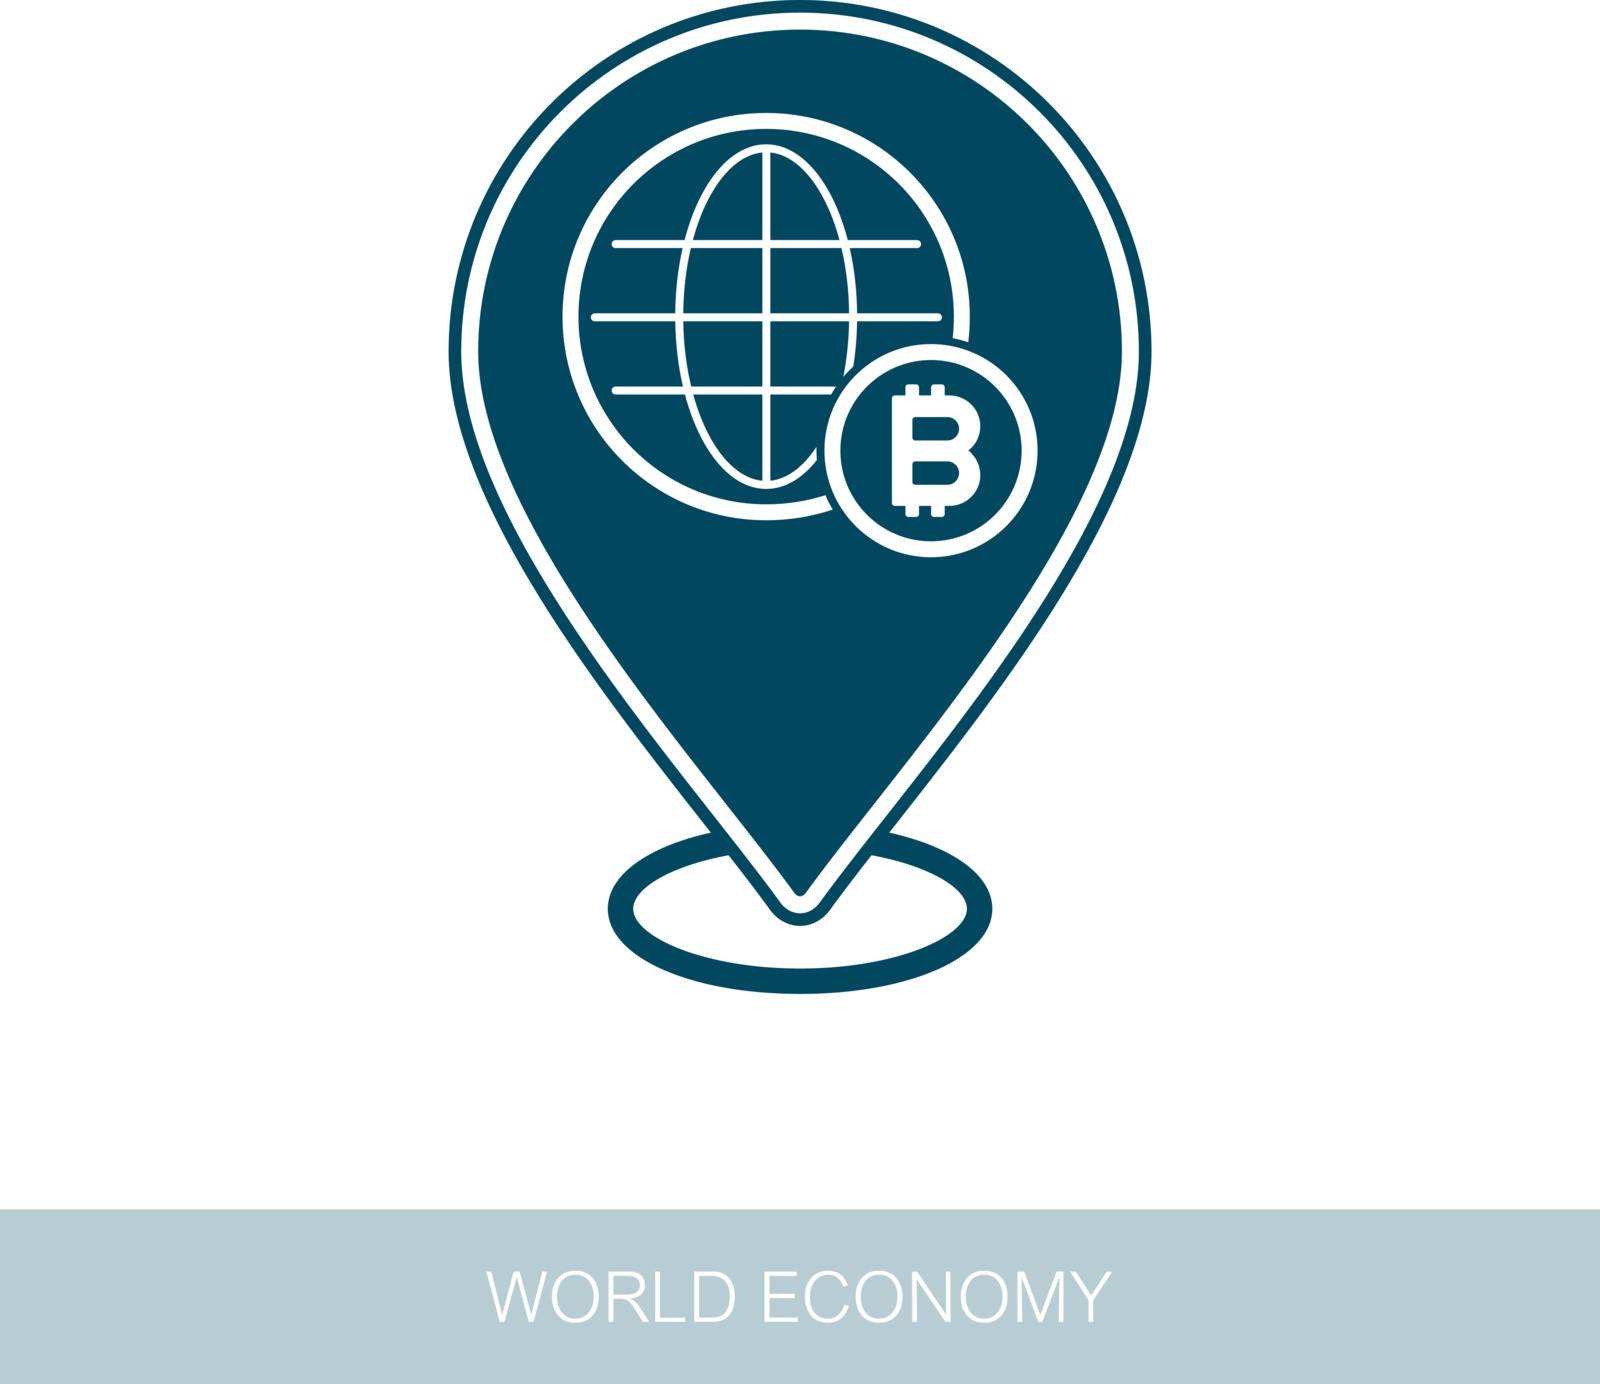 Global economy pin map icon, financial and money concept. Map pointer. Map markers. Vector design of blockchain technology, bitcoin, altcoins, cryptocurrency mining, finance, digital money market